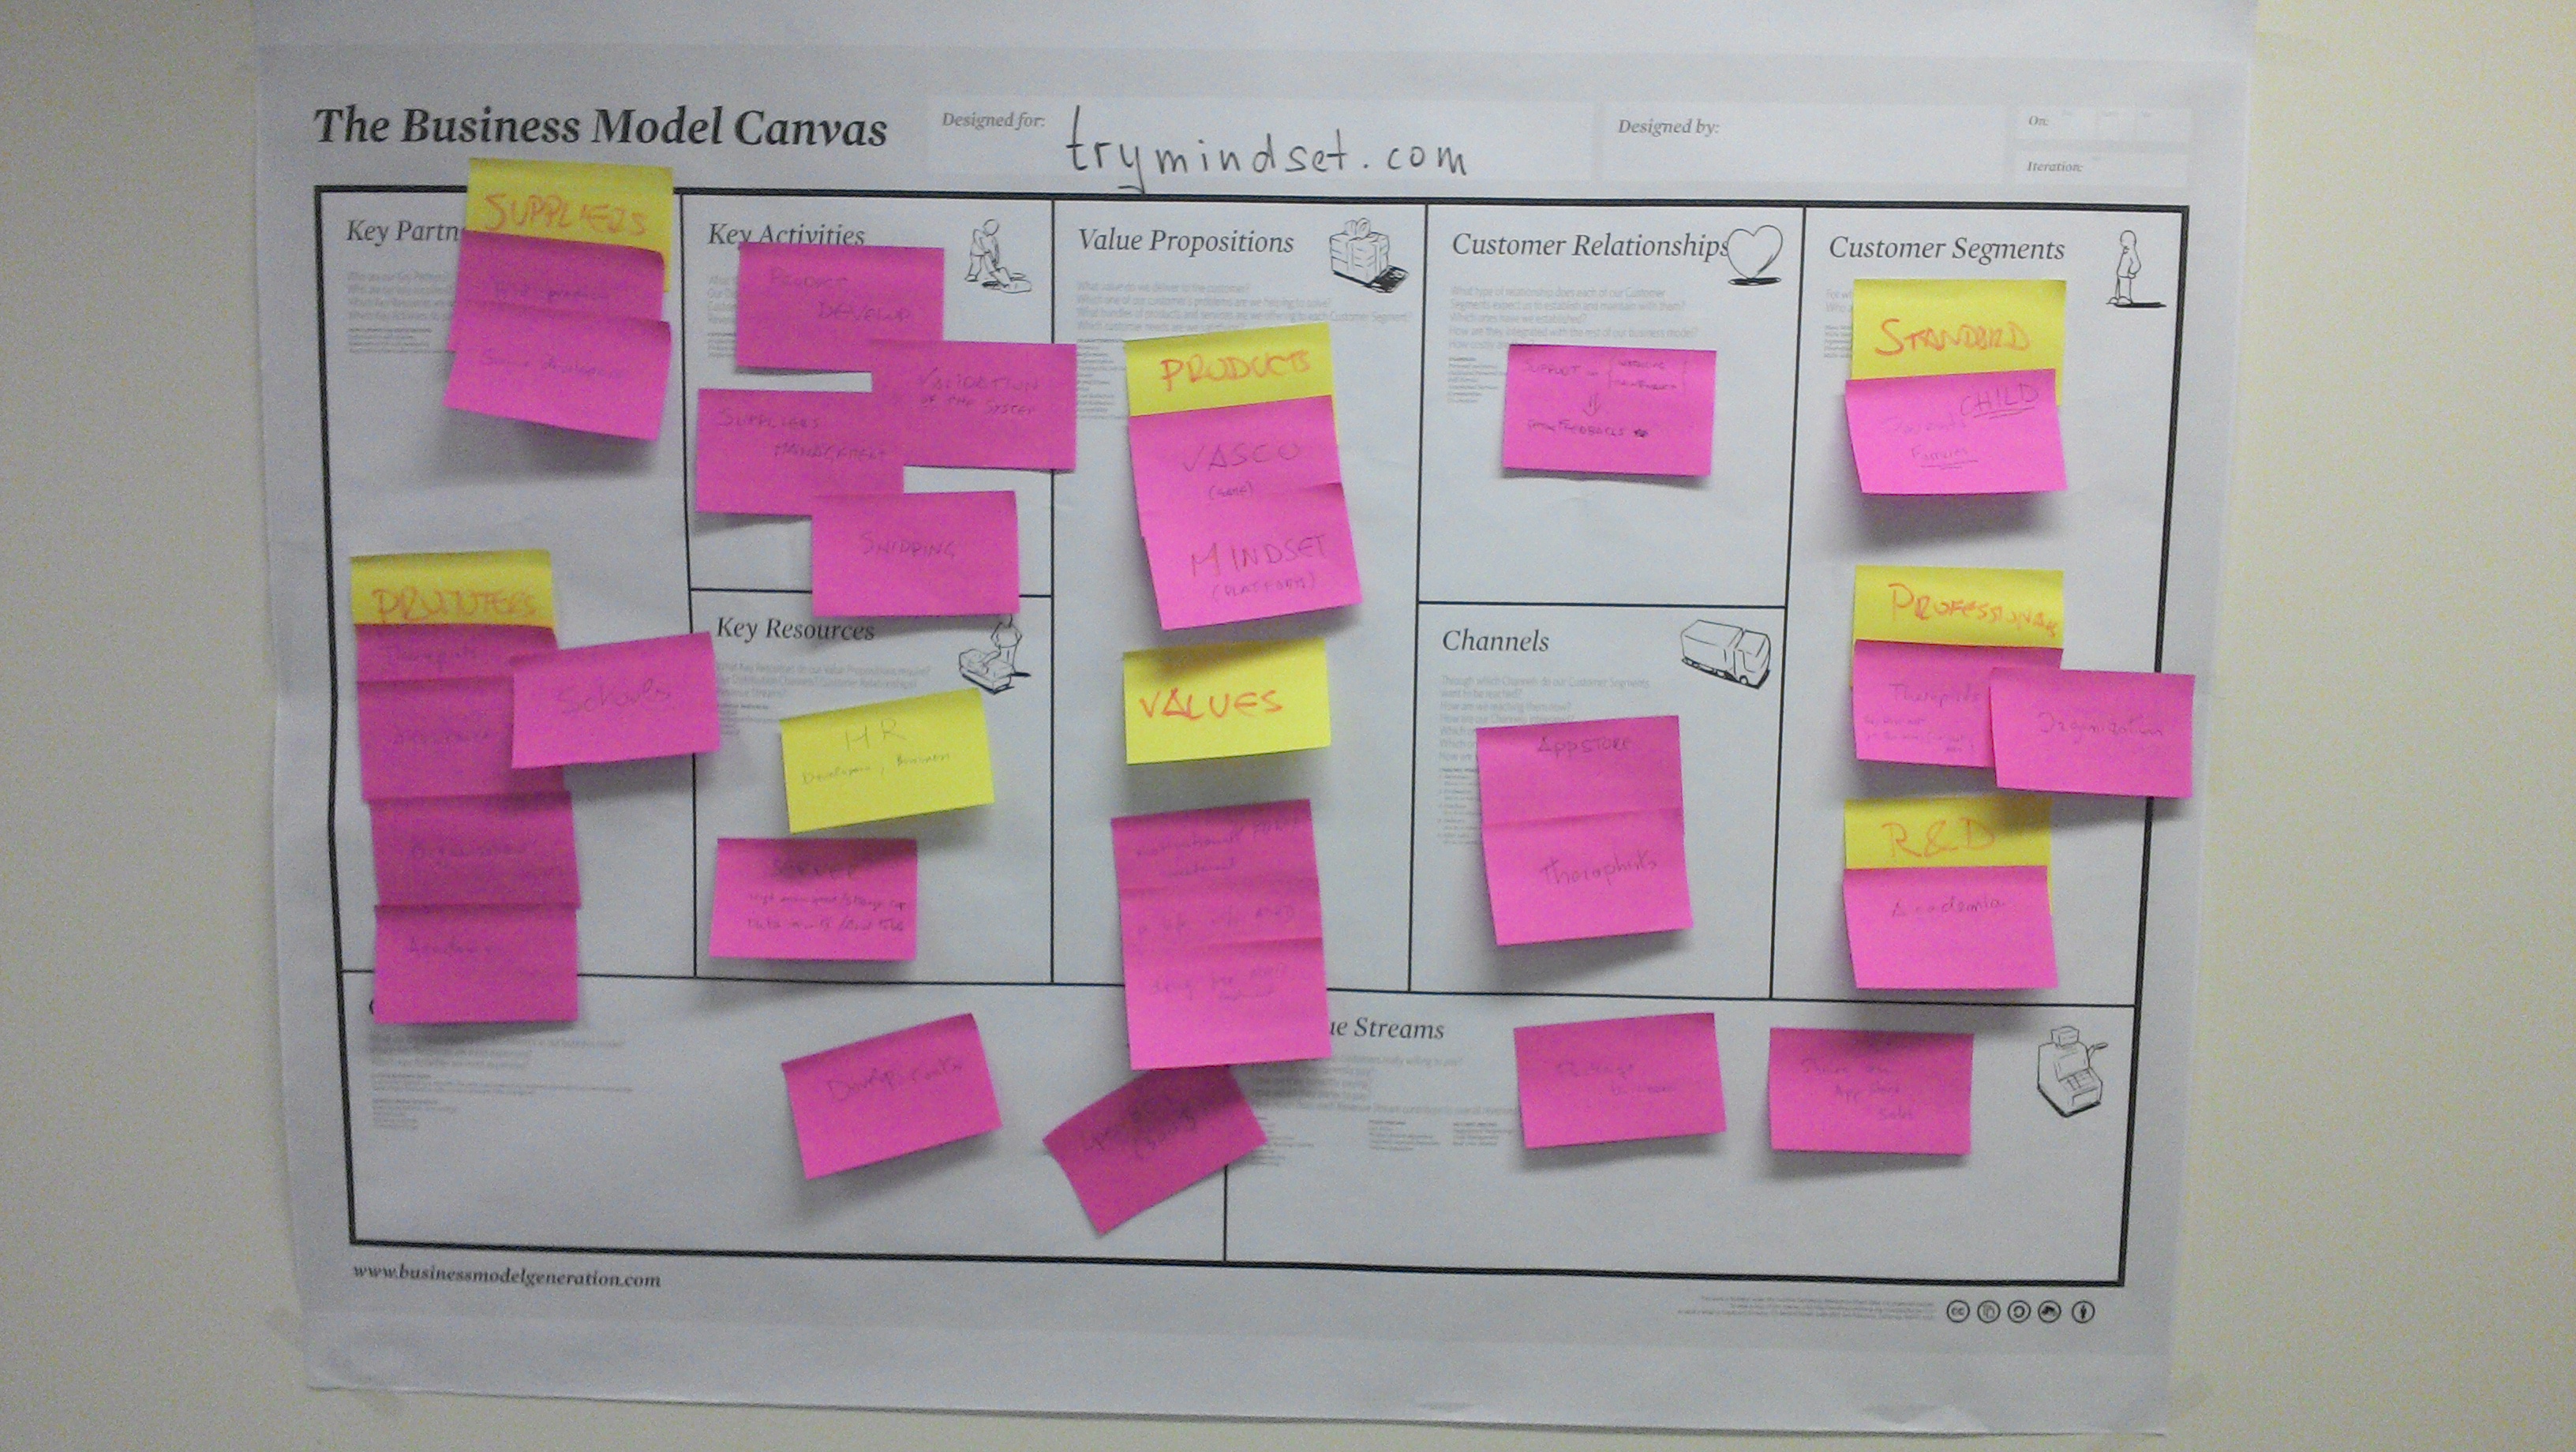 Our Business Model Canvas